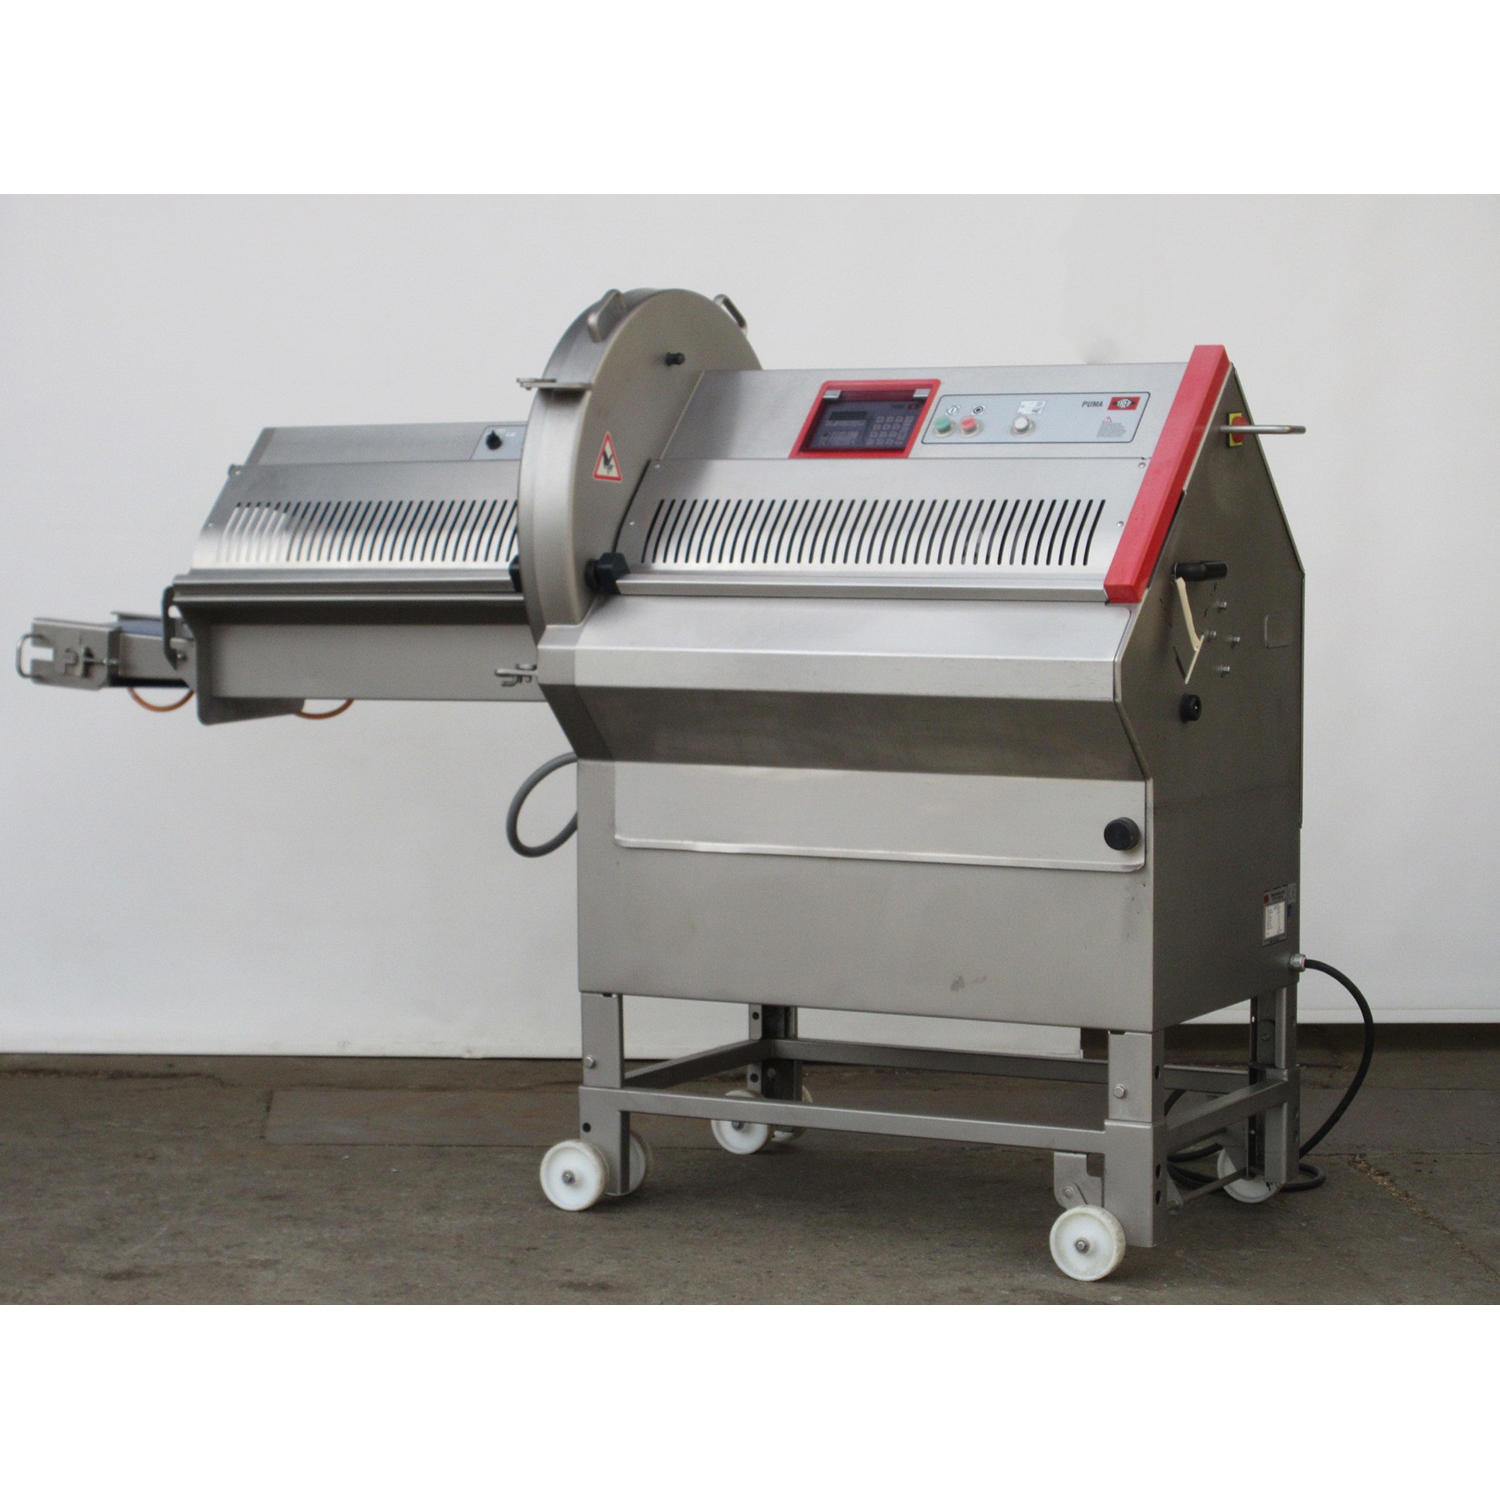 Treif PUMA CE 700EB Meat Portion Slicer, Used Excellent Condition image 1